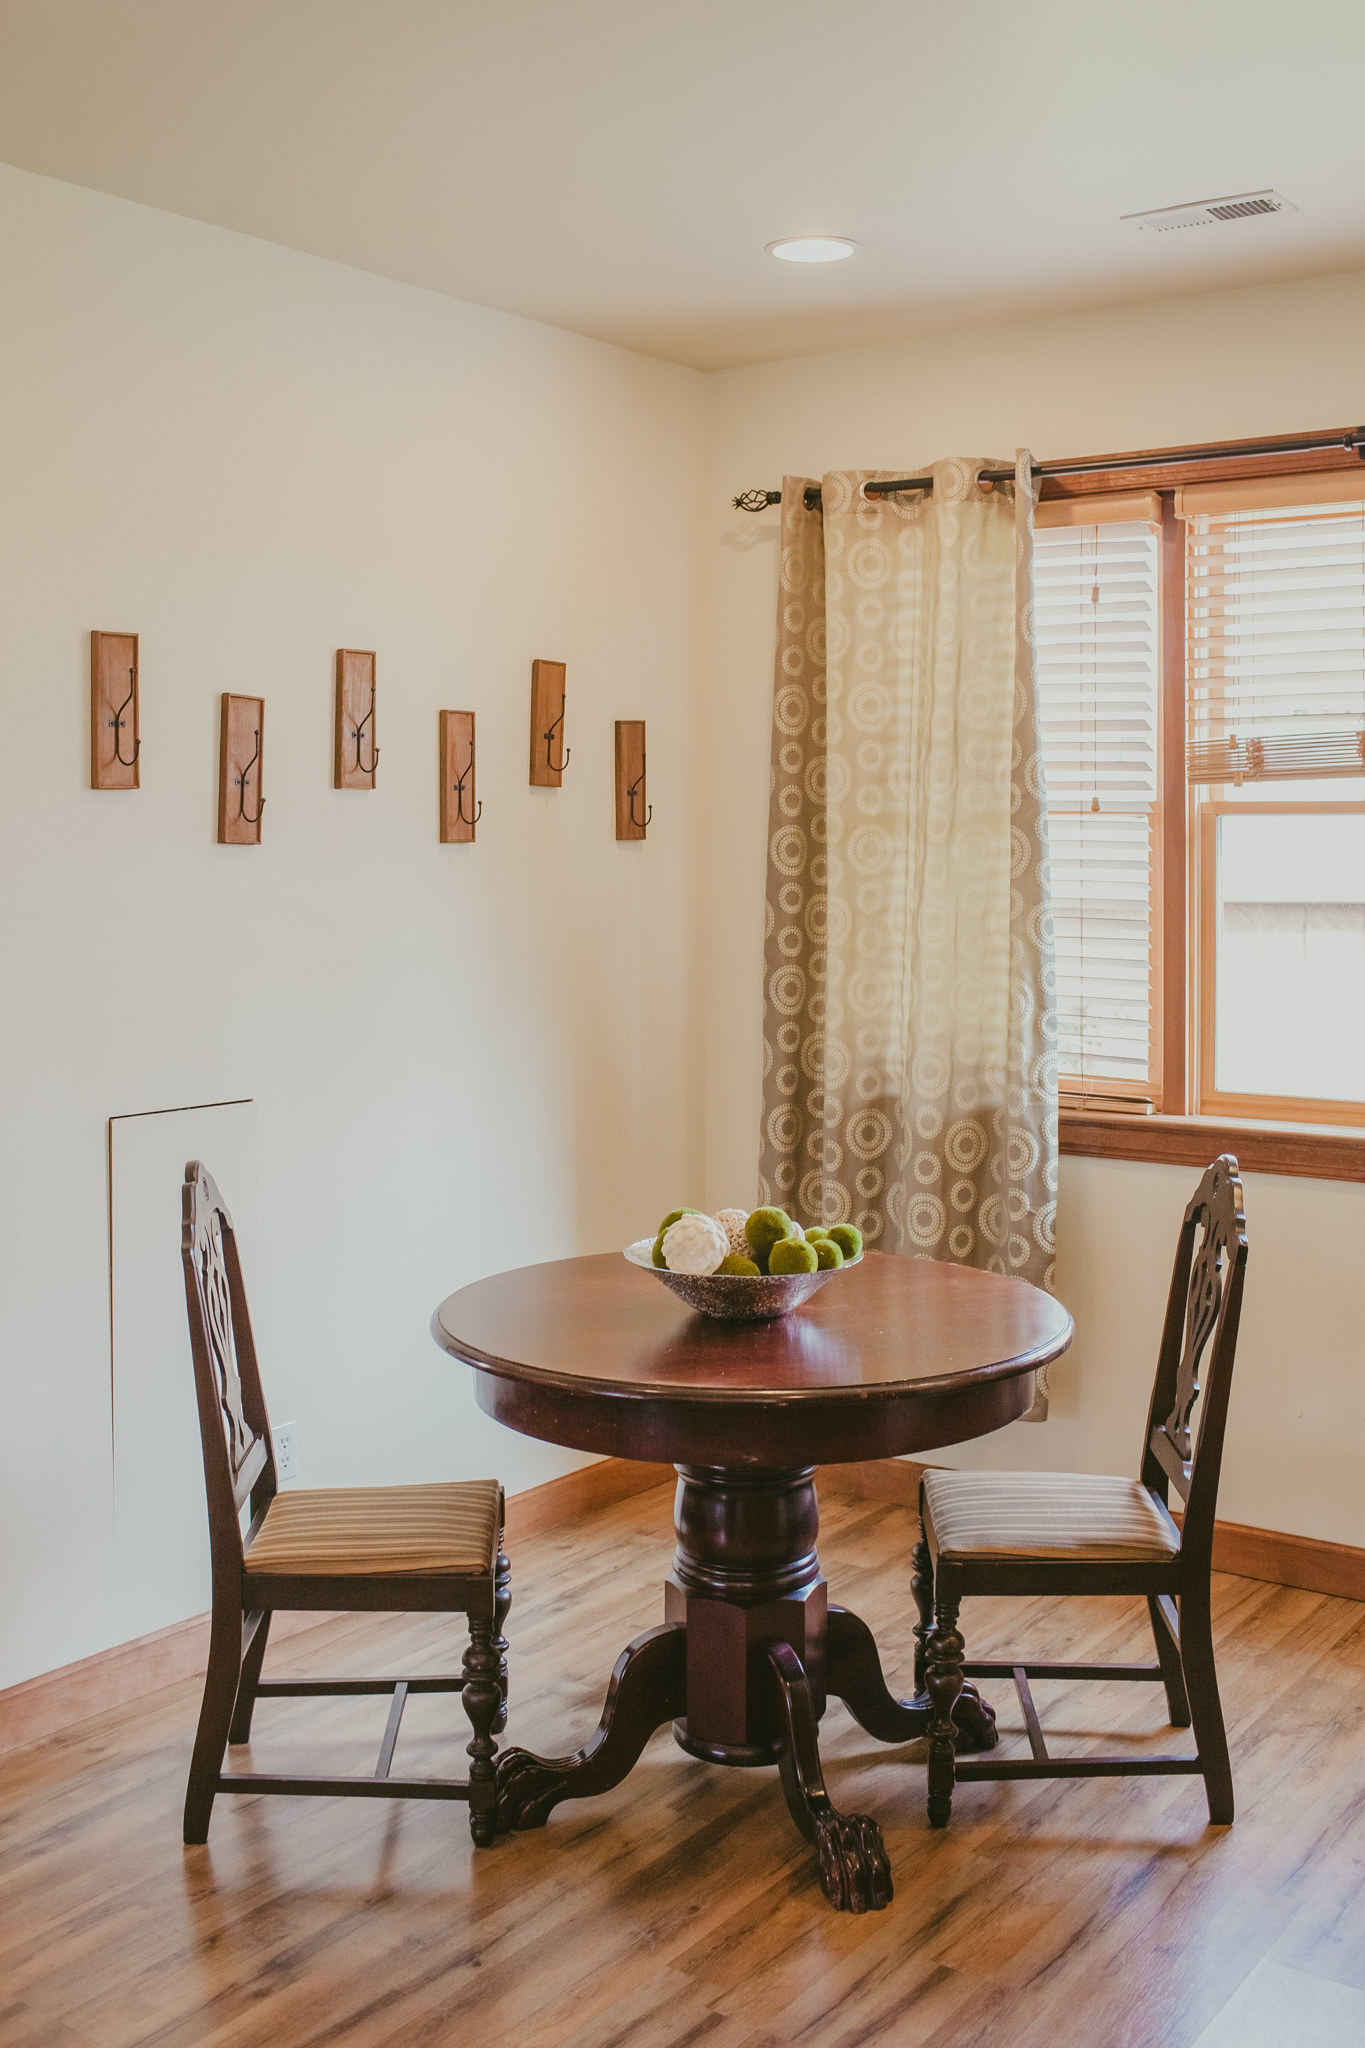 The breakfast nook in the bridal suite at Alexander Homestead